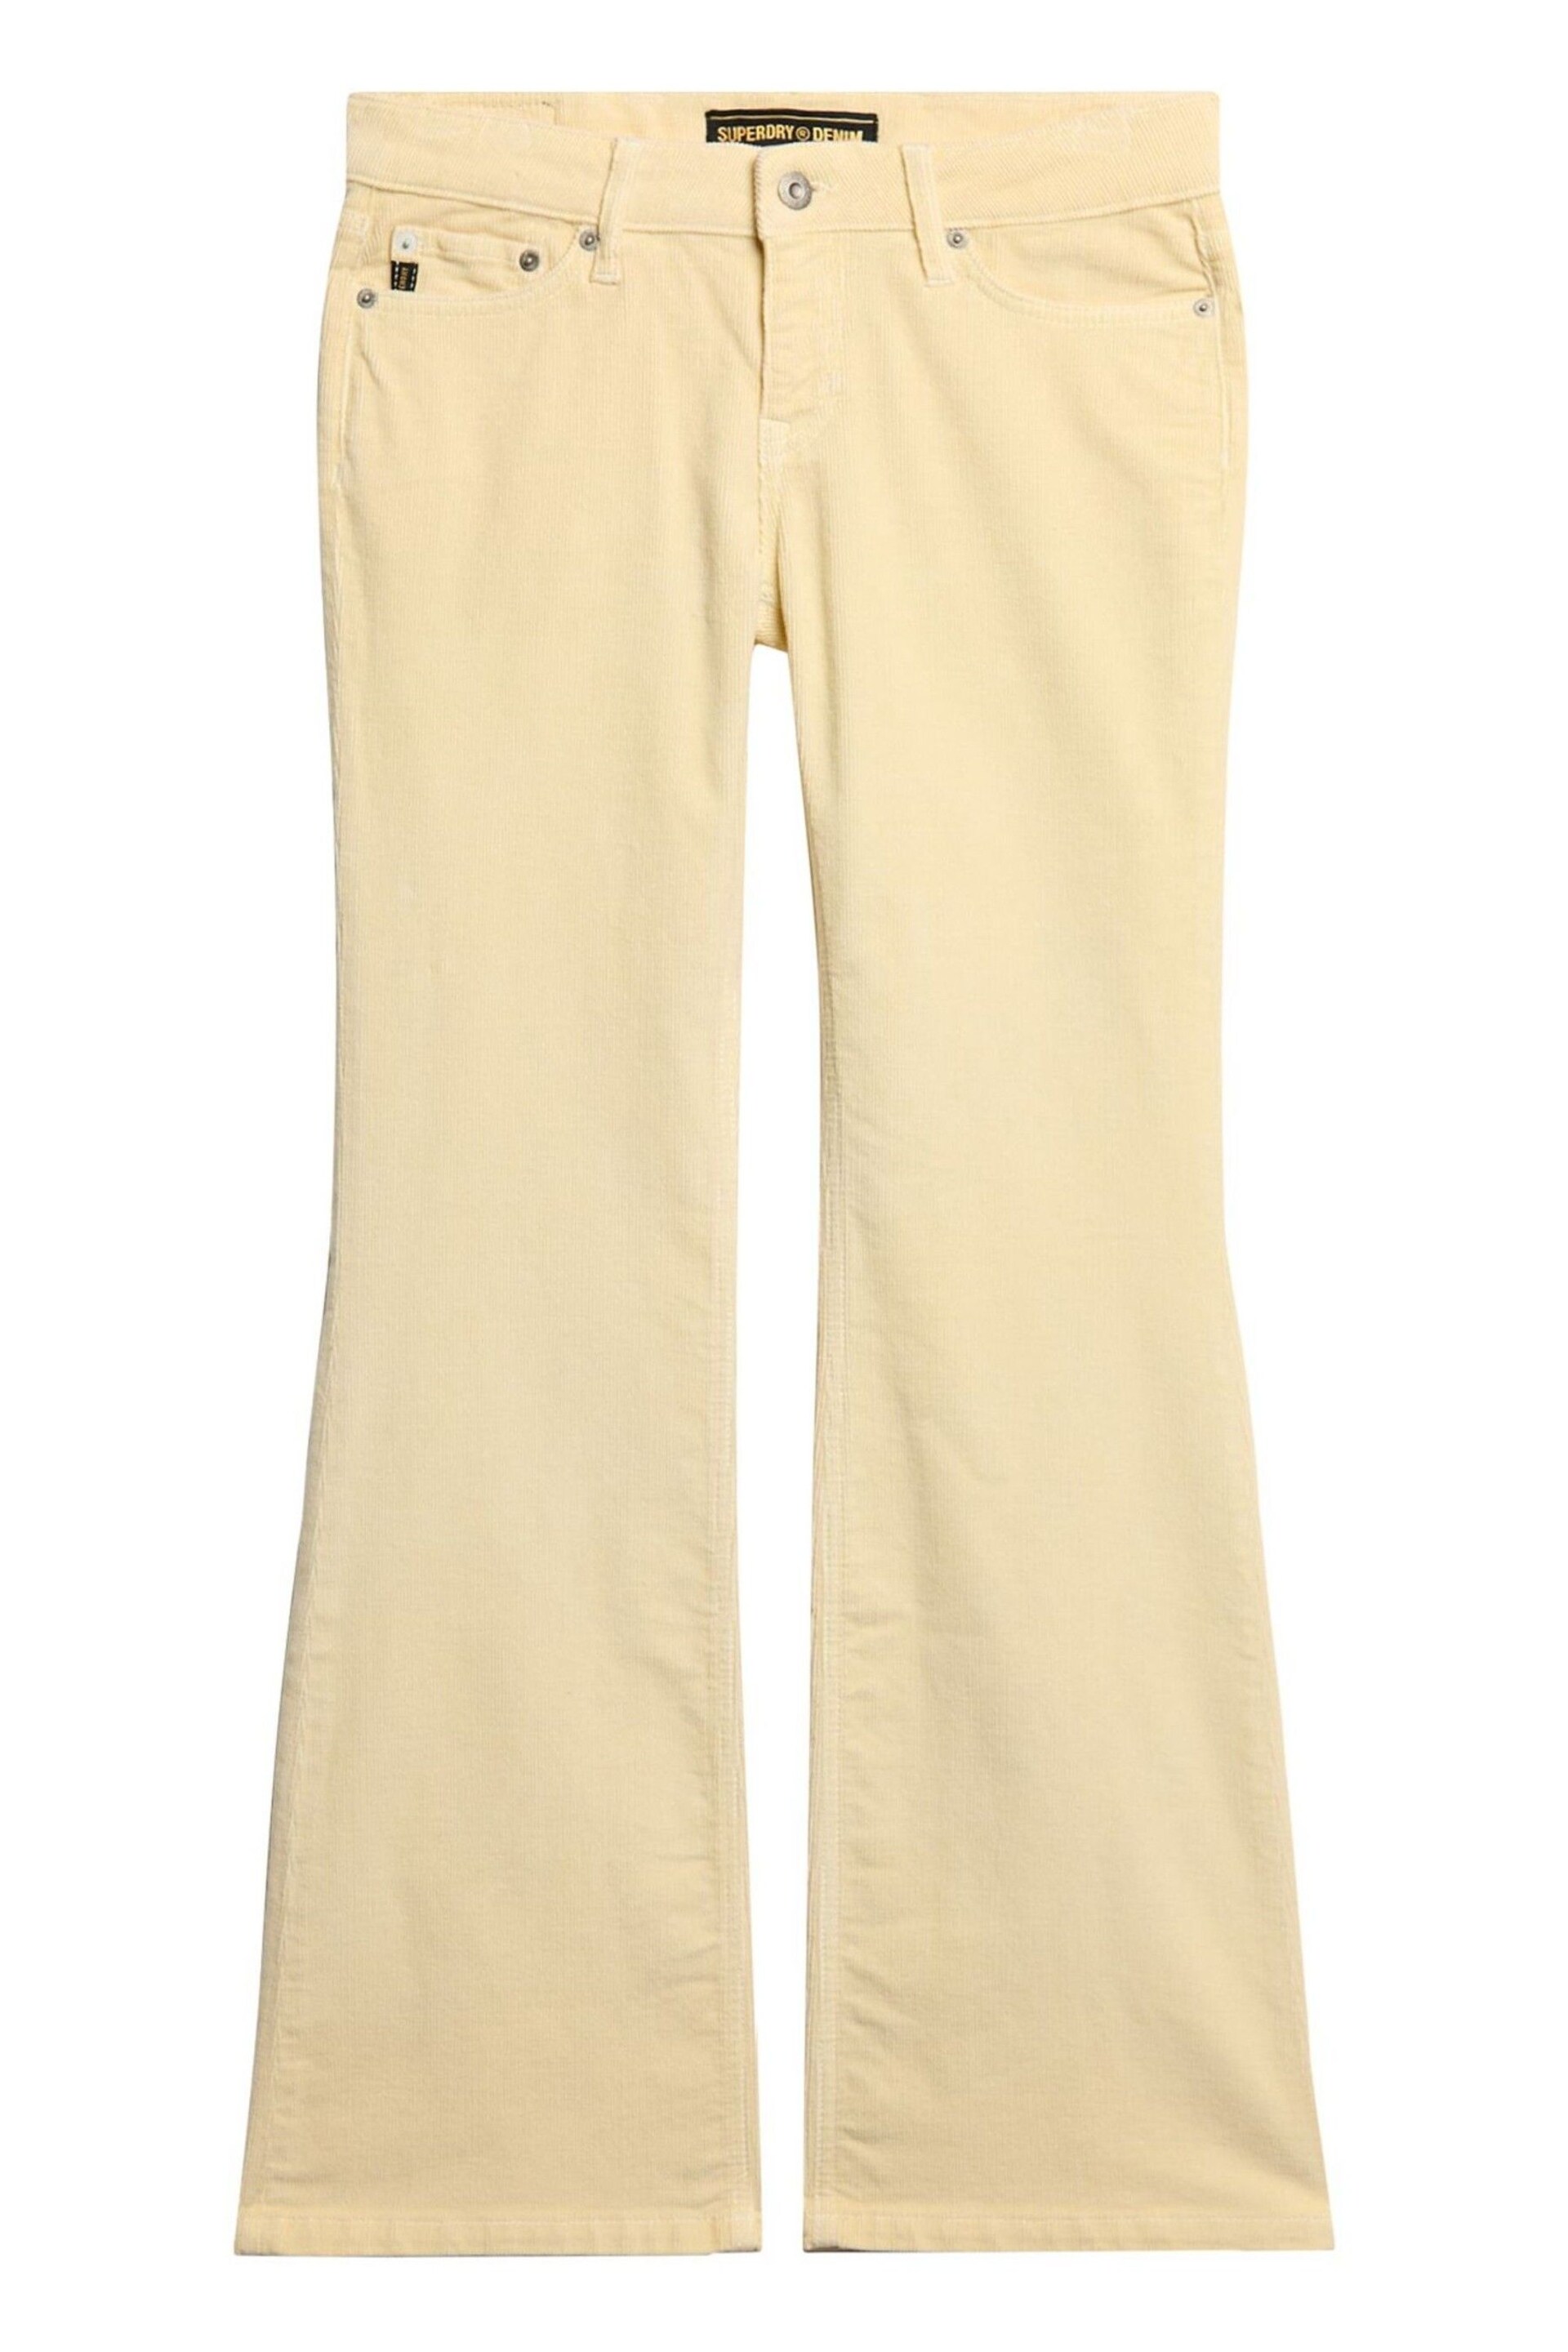 Superdry Cream Low Rise Cord Flare Jeans - Image 5 of 5